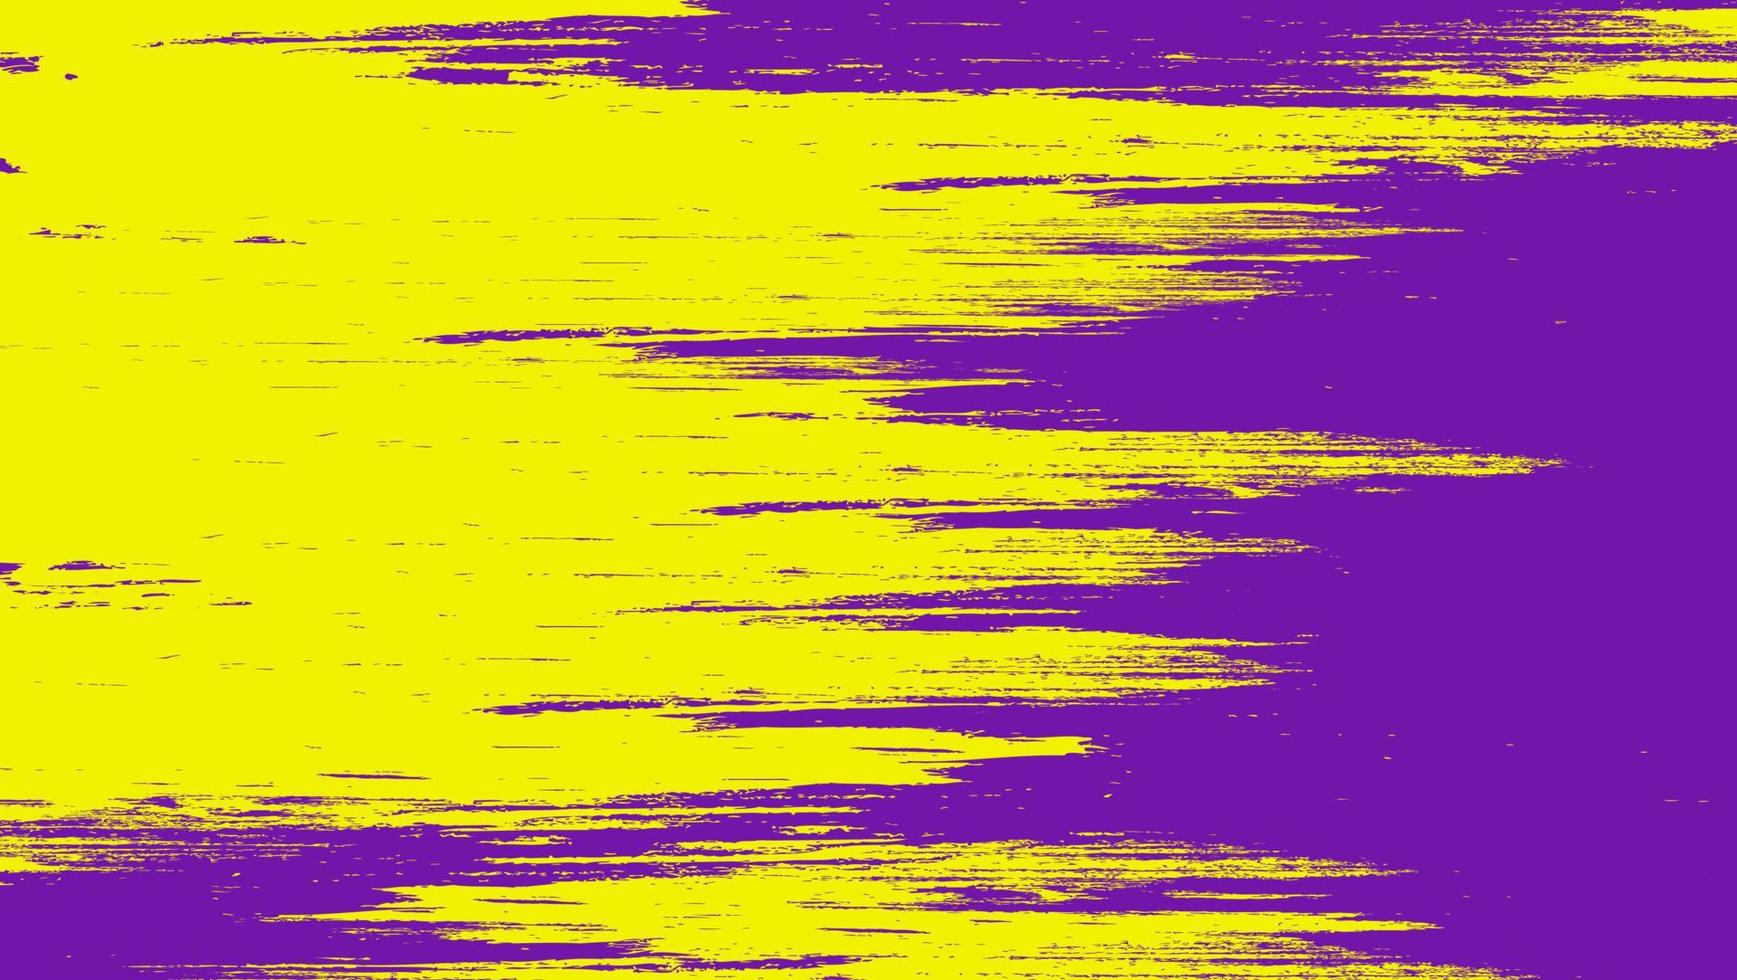 Abstract Yellow Grunge Background With Purple Scratch Texture vector